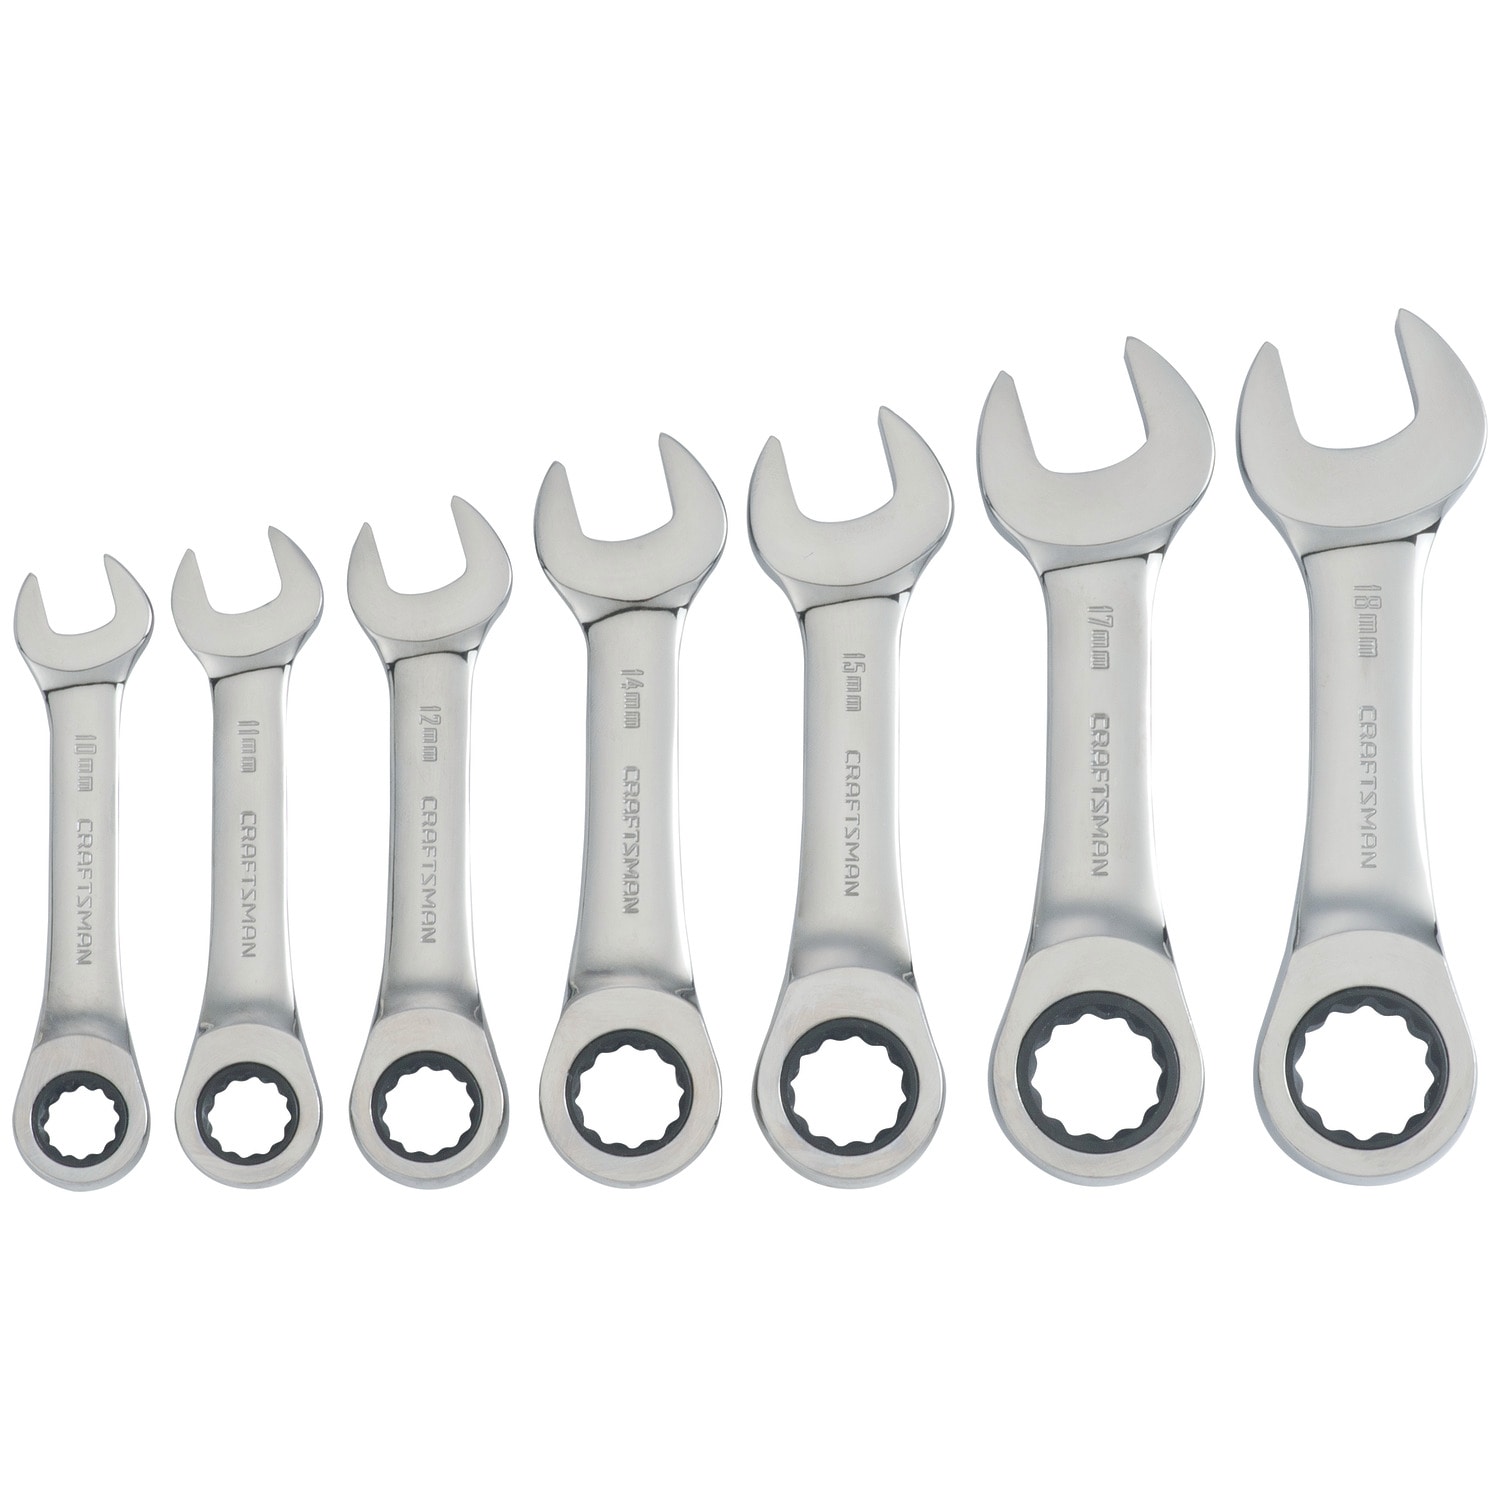 CRAFTSMAN HAND TOOLS 11pc FULL POLISH Stubby Combination METRIC MM Wrench set ! 